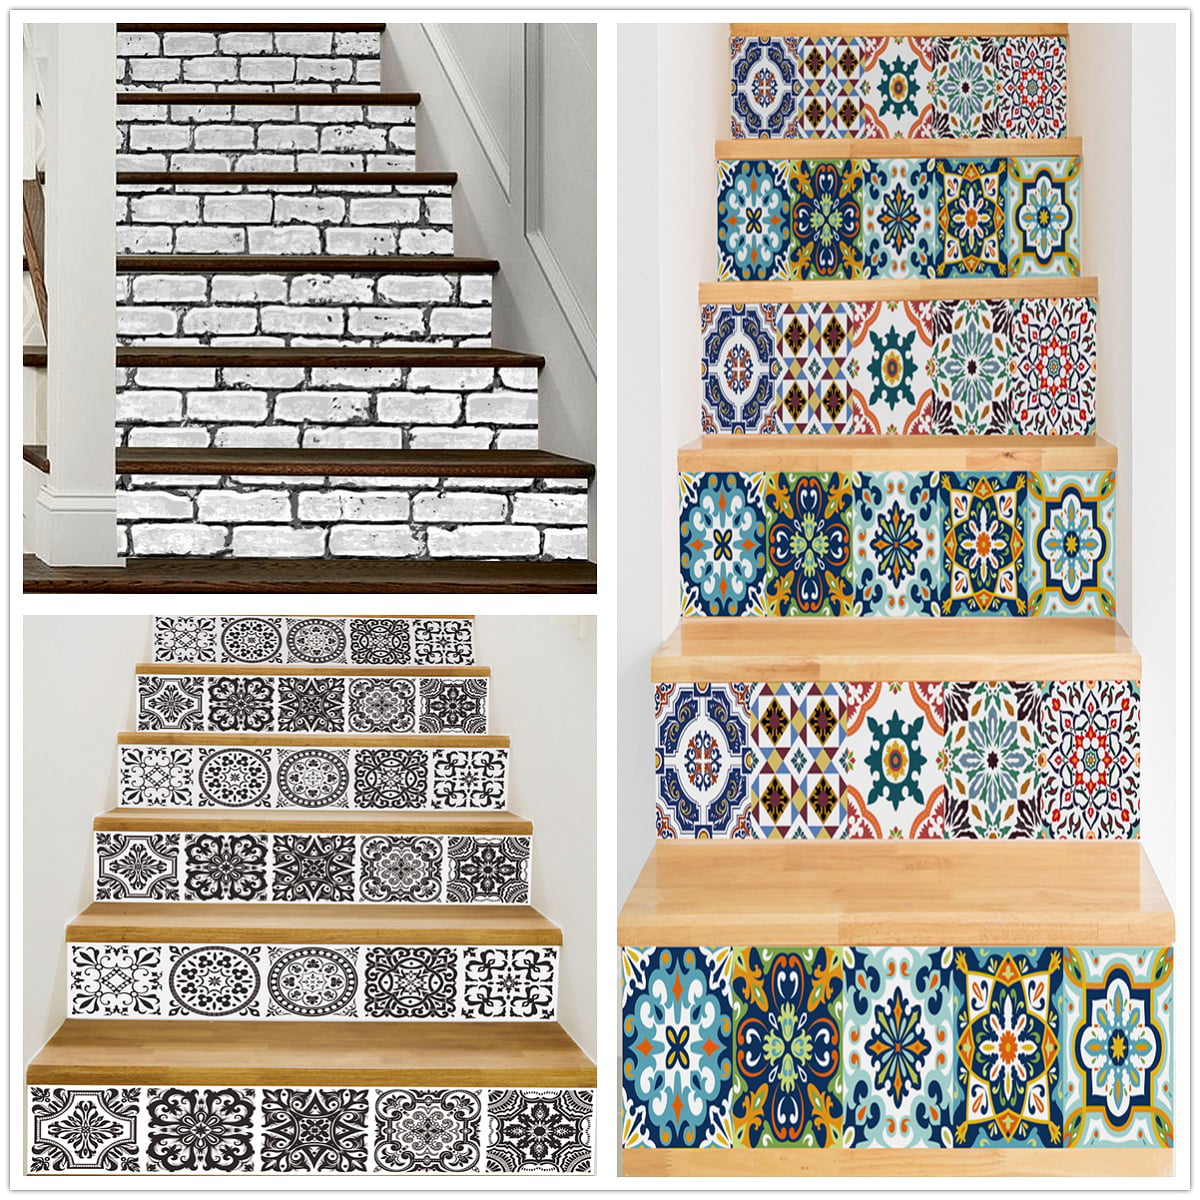 Removable Tile Decals Stickers Vinyl Stair Decals for Tiles Stair Decal Stickers Decorative Tile Stickers 7x 39x6PCS Self-Adhesive Kitchen Tile Stickers Tile Decals for Bathroom Stair Sticker